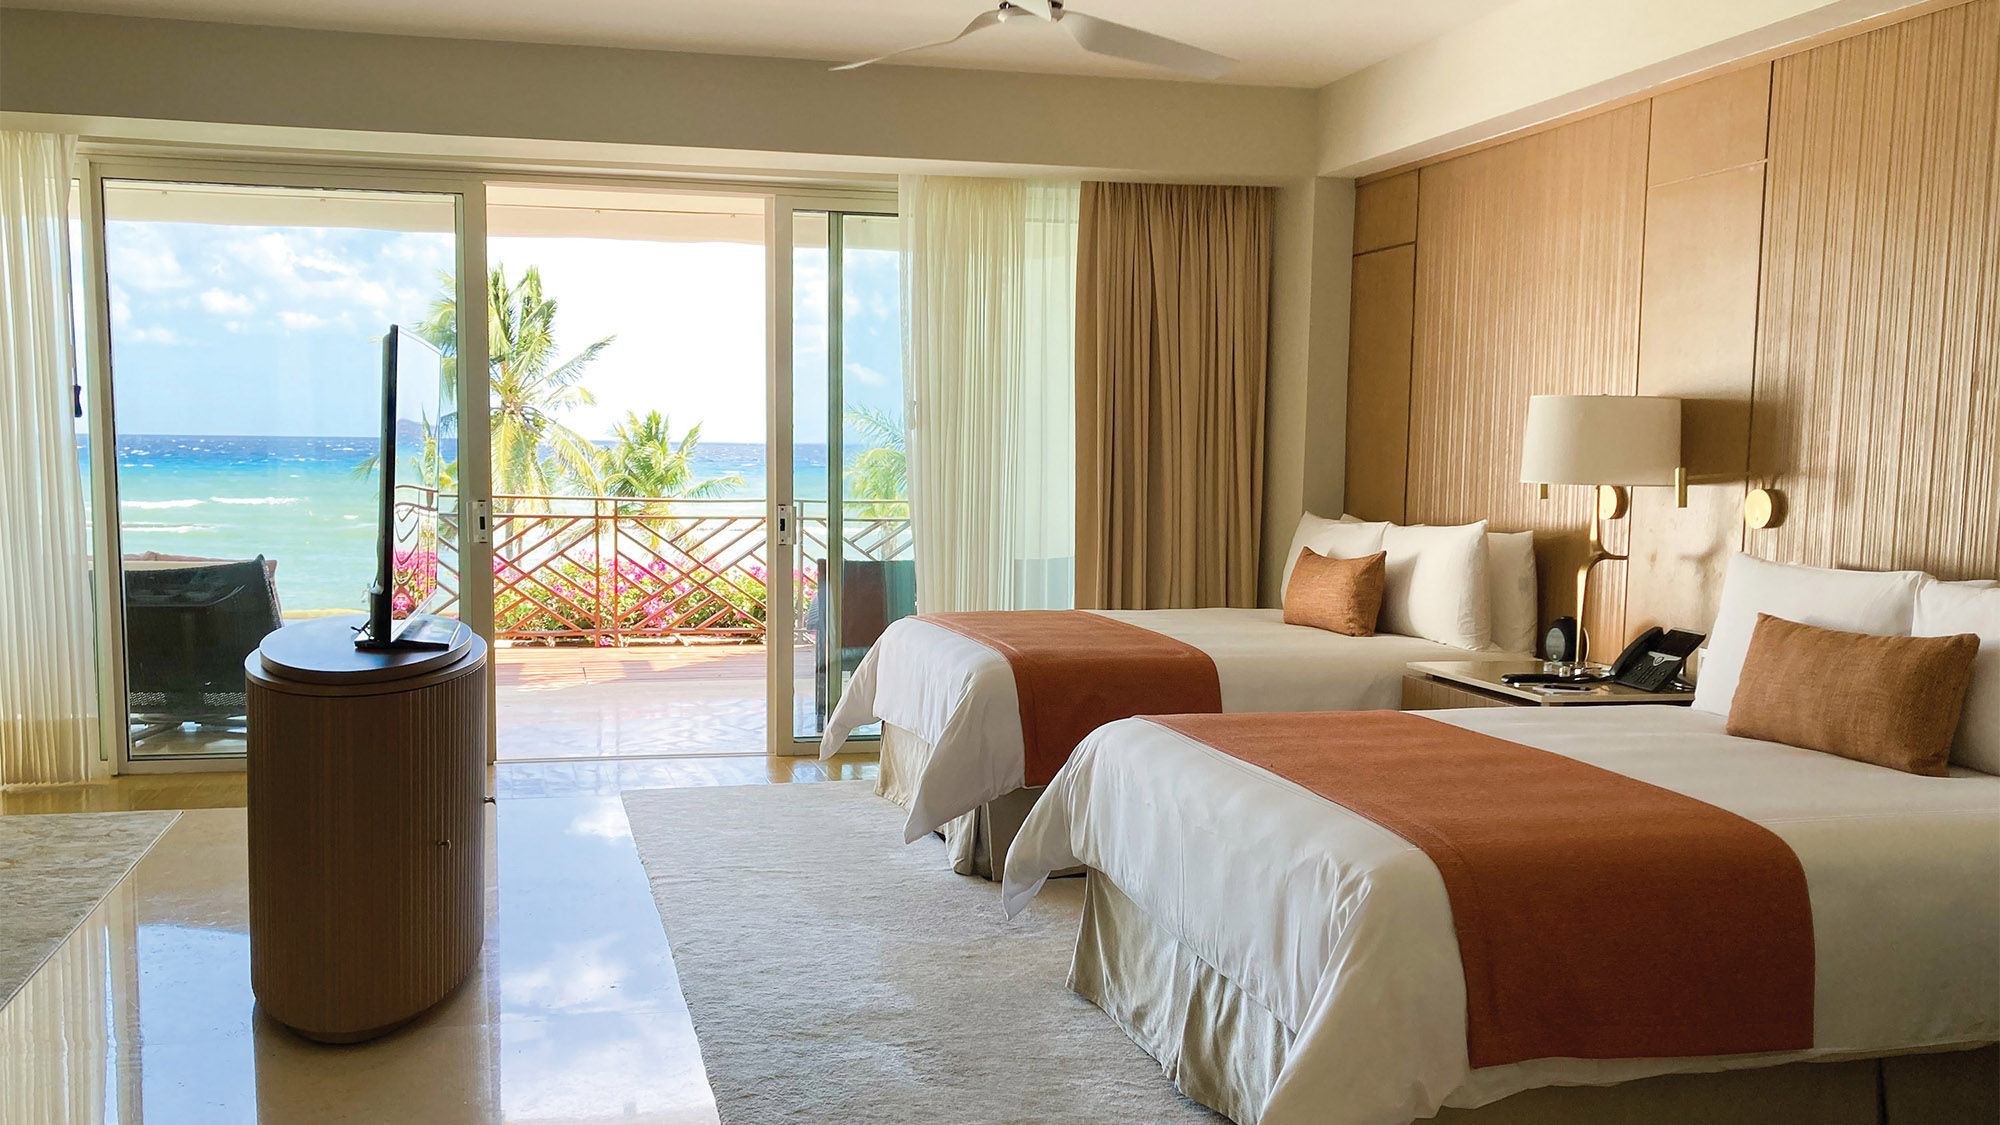 A guestroom in the all-inclusive resort's adults-only, oceanfront Grand Class section.